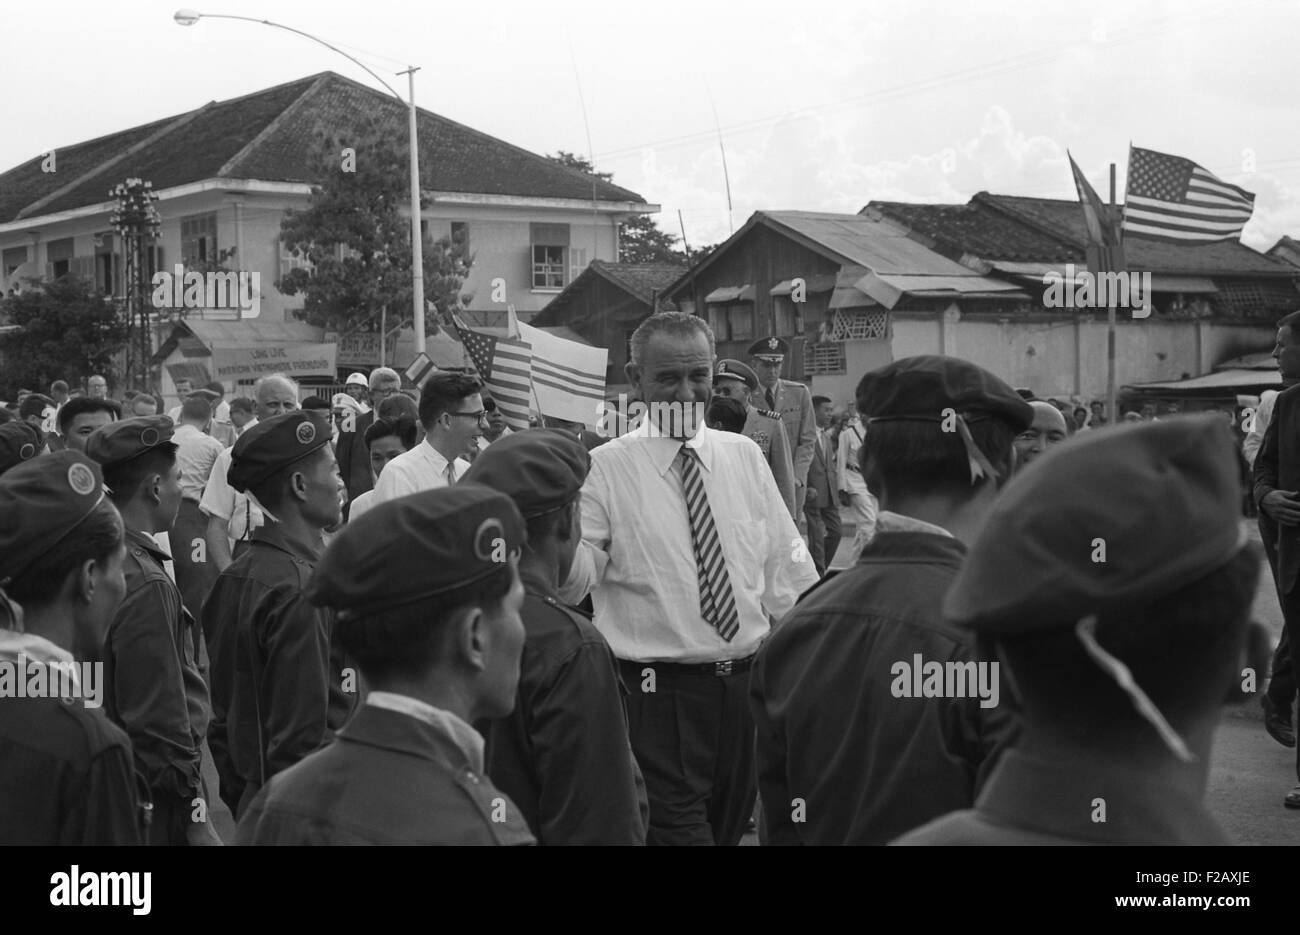 Vice-President Lyndon Johnson among group of Vietnamese soldiers and Americans. President Kennedy increased American forces to 12,000 U.S. military advisors in Vietnam by 1962. Saigon, South Vietnam, May 12, 1962. (BSLOC 2015 2 209) Stock Photo